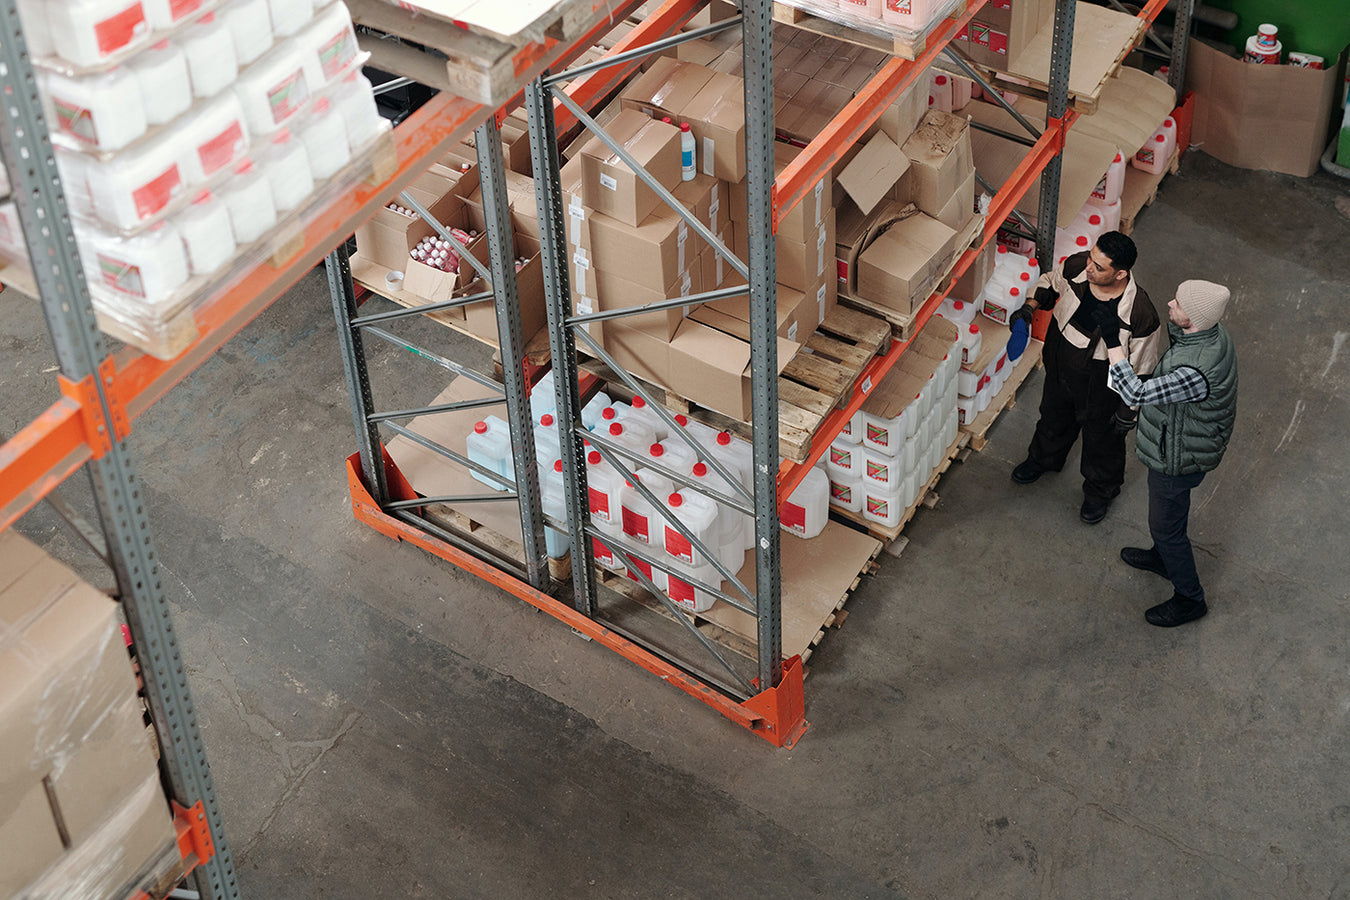 Top view of a warehouse full of boxes with two people looking at the boxes.